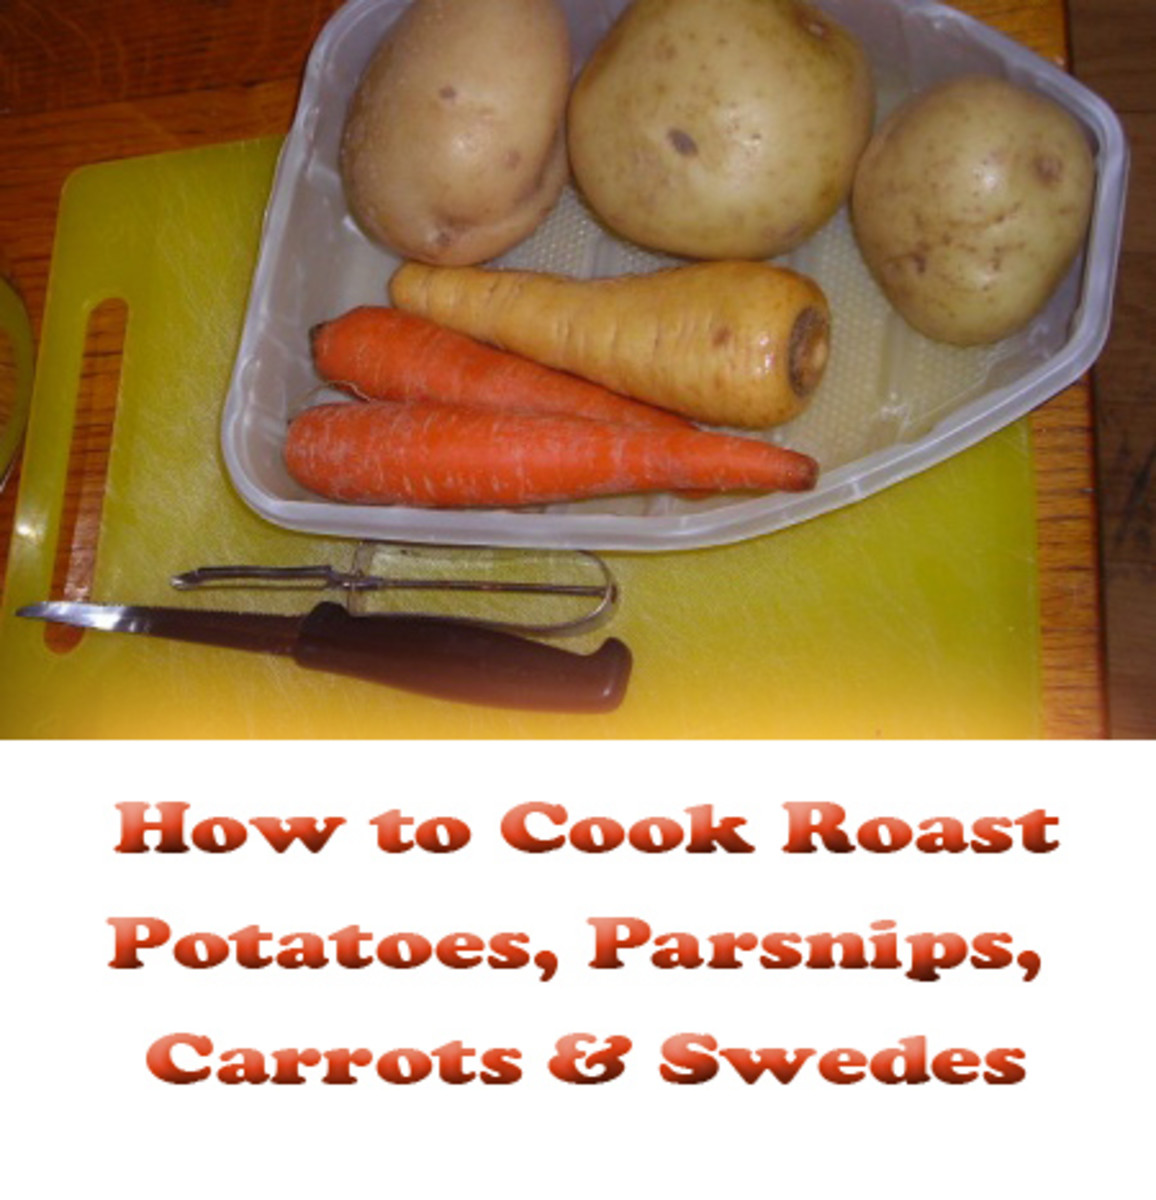 How to Cook Vegetables Like Potatoes, Carrots and Parsnips for Christmas Dinnner